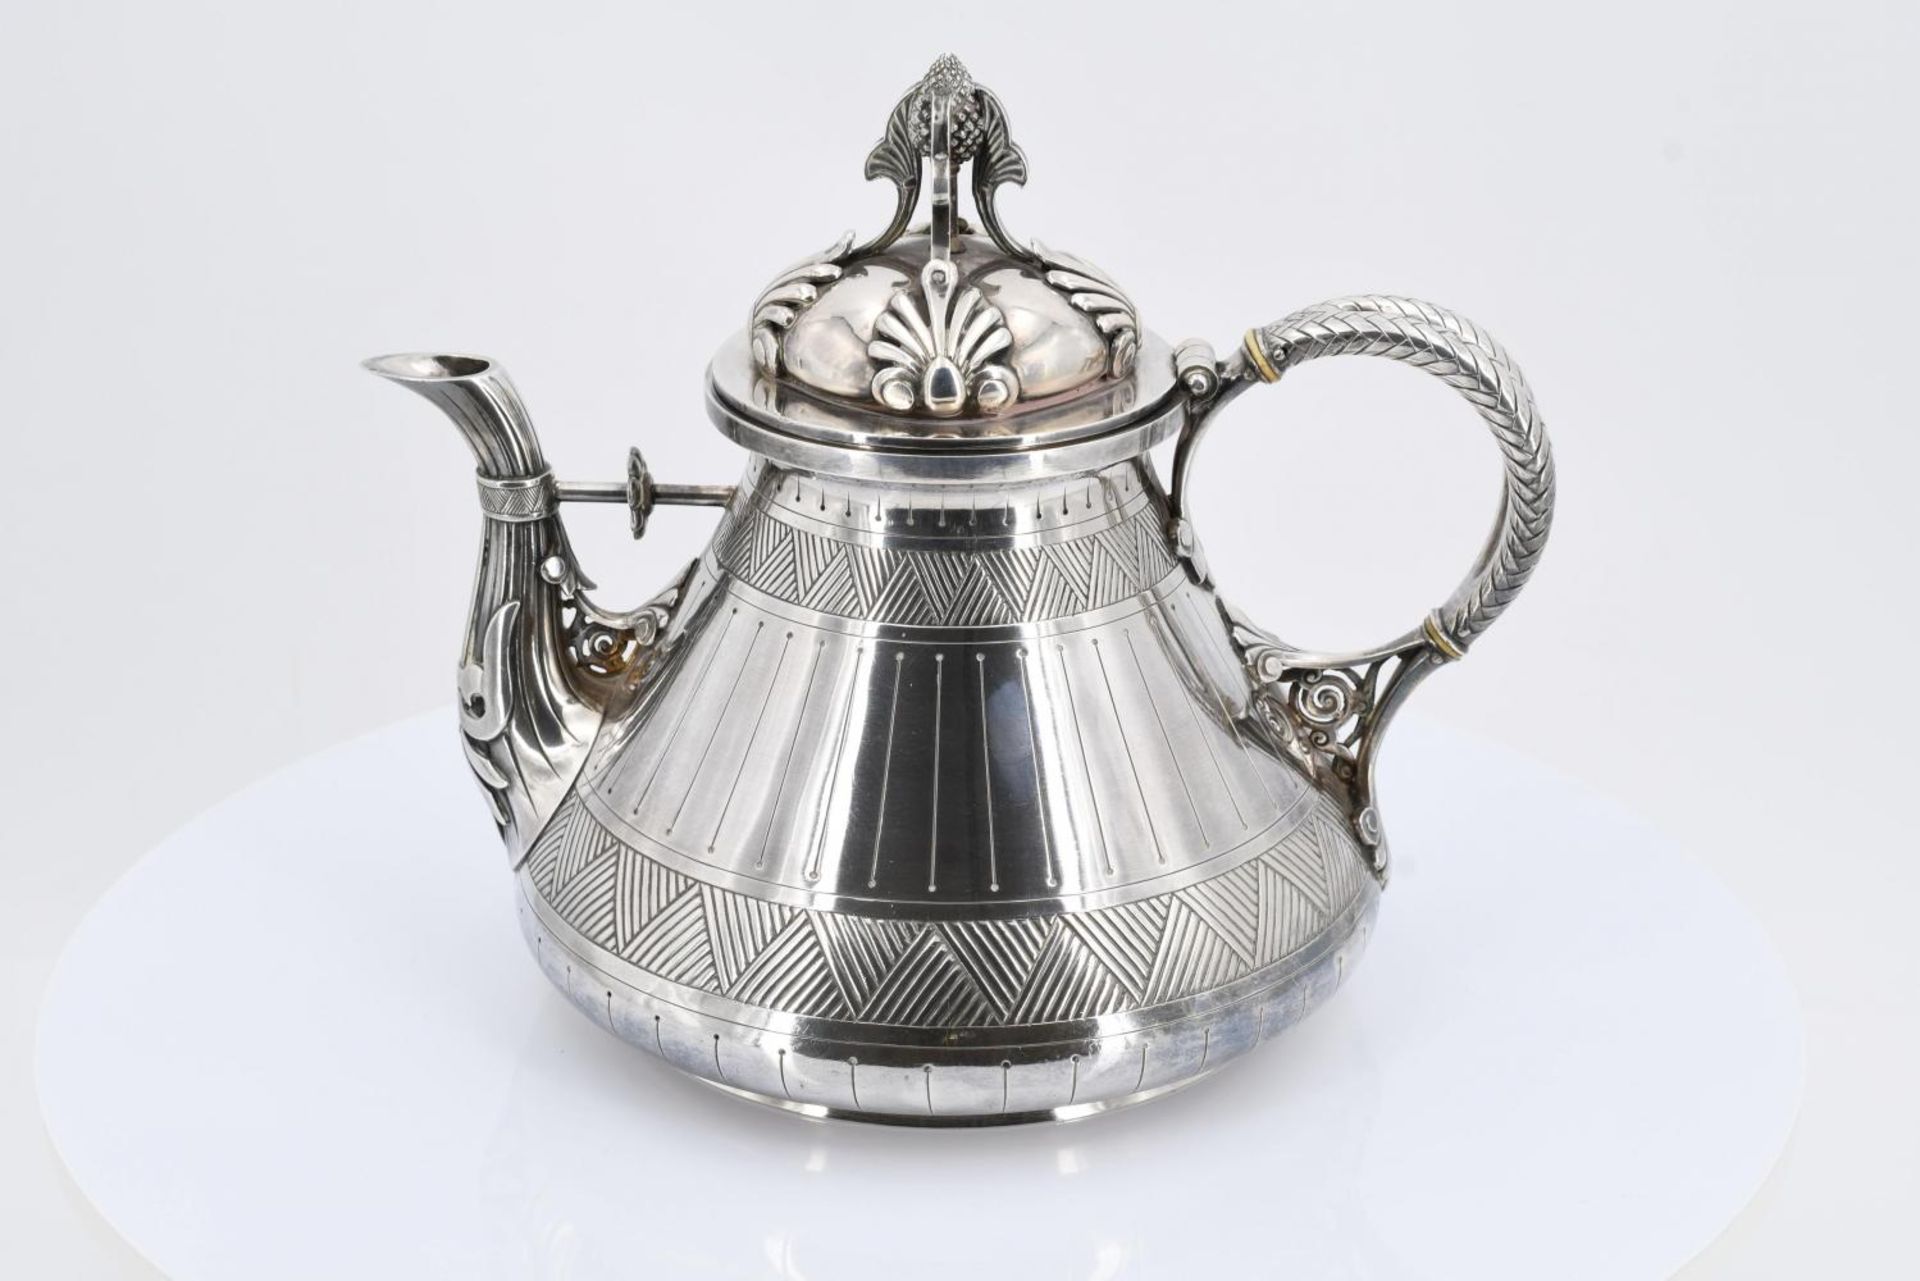 Émile Froment-Meurice: SILVER COFFEE AND TEA SERVICE IN ORIENTAL STYLE - Image 14 of 25